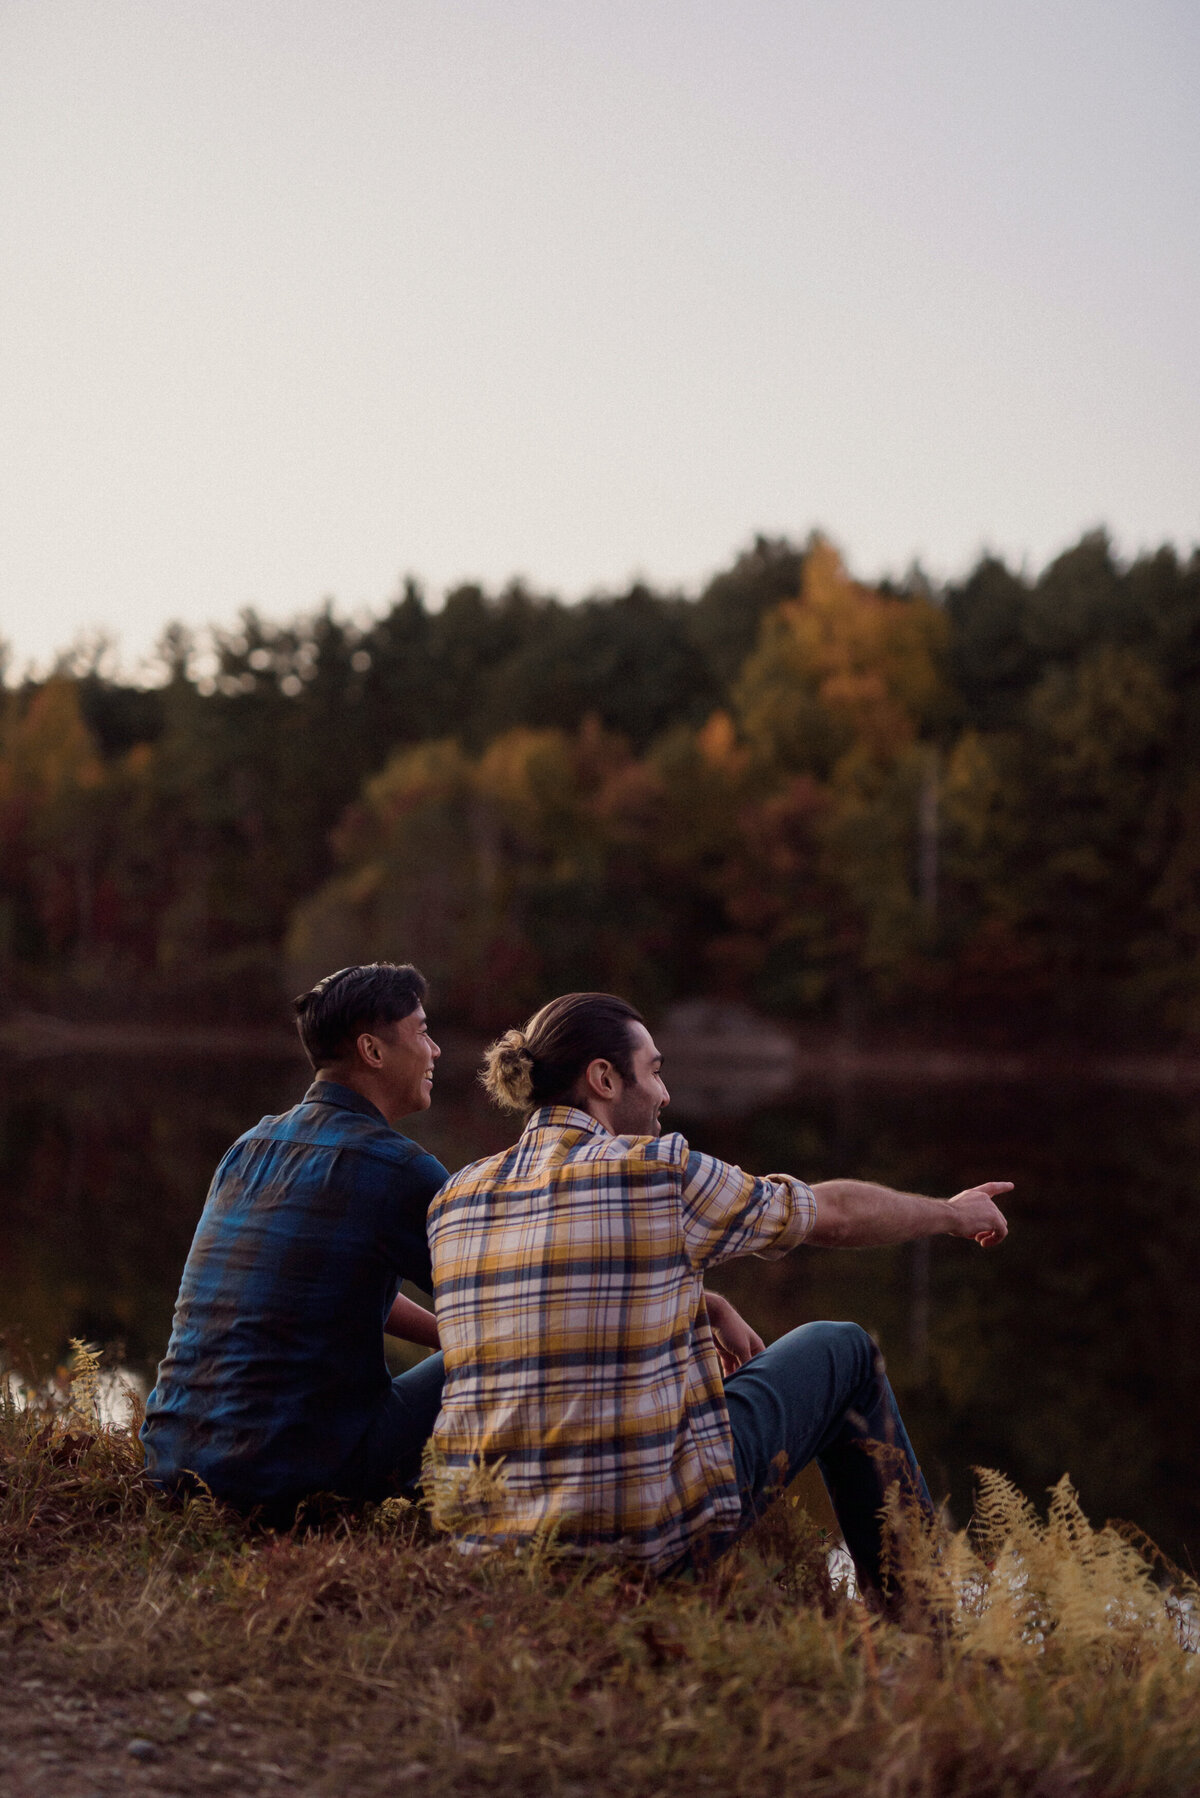 two men engagement session by a lake in the woods. multicultural with a white and asian man. gay couple for a lgbtq  session.